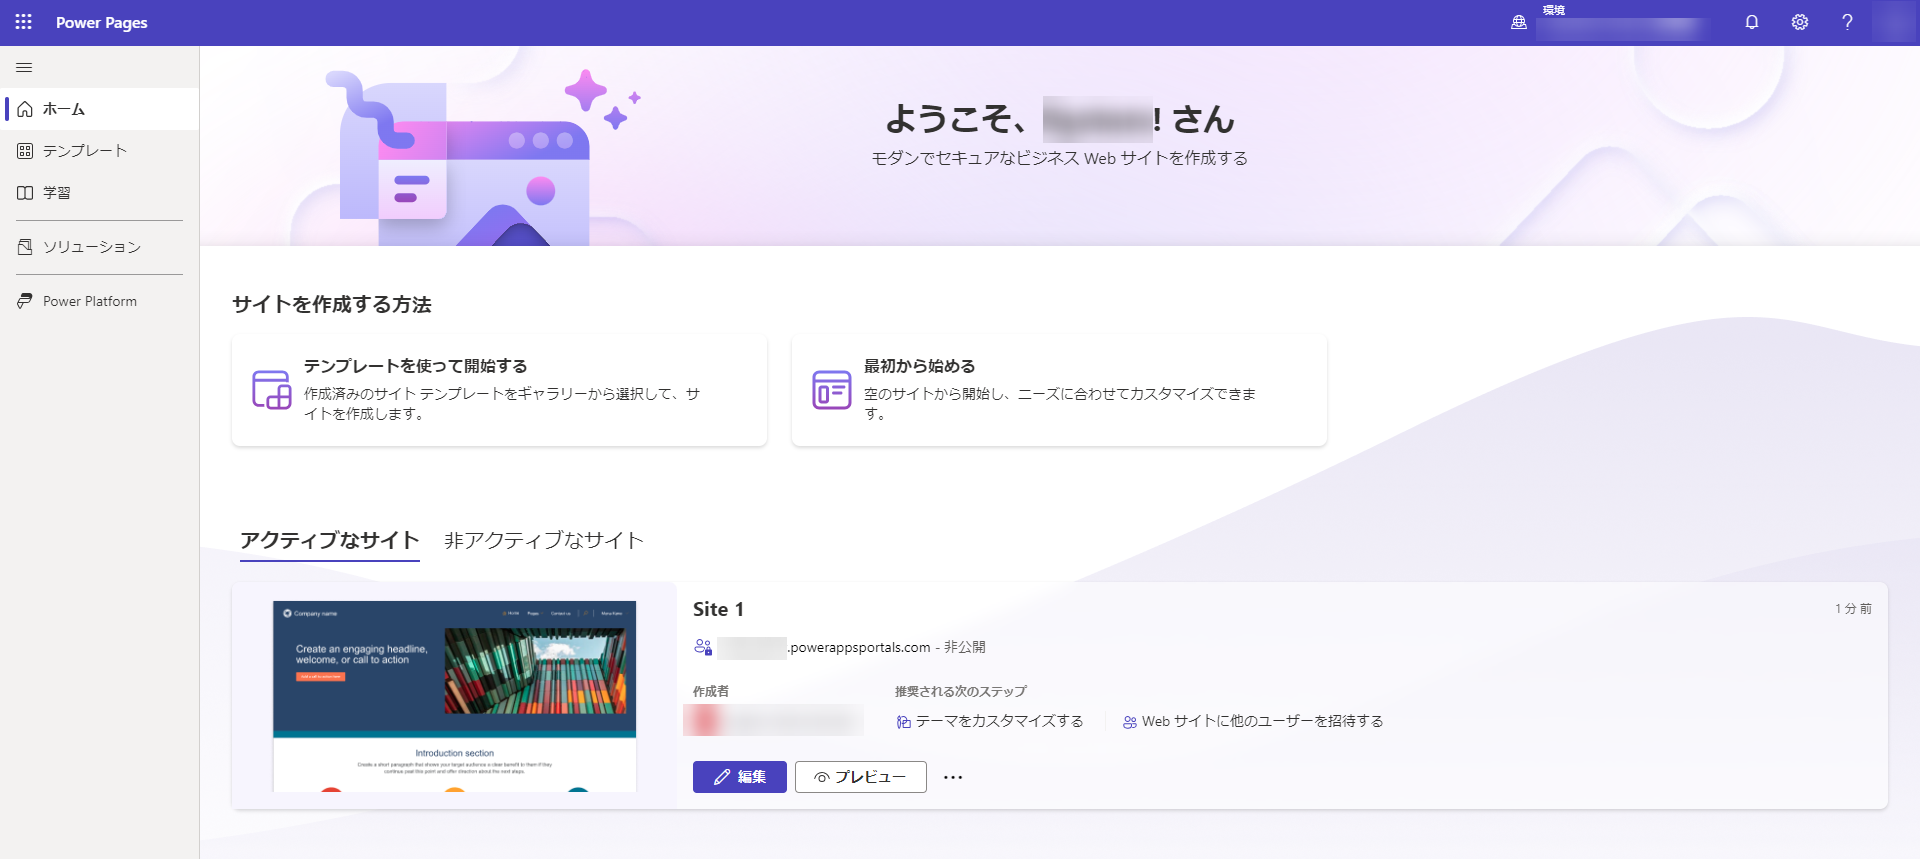 Power Pages サイトの一覧。